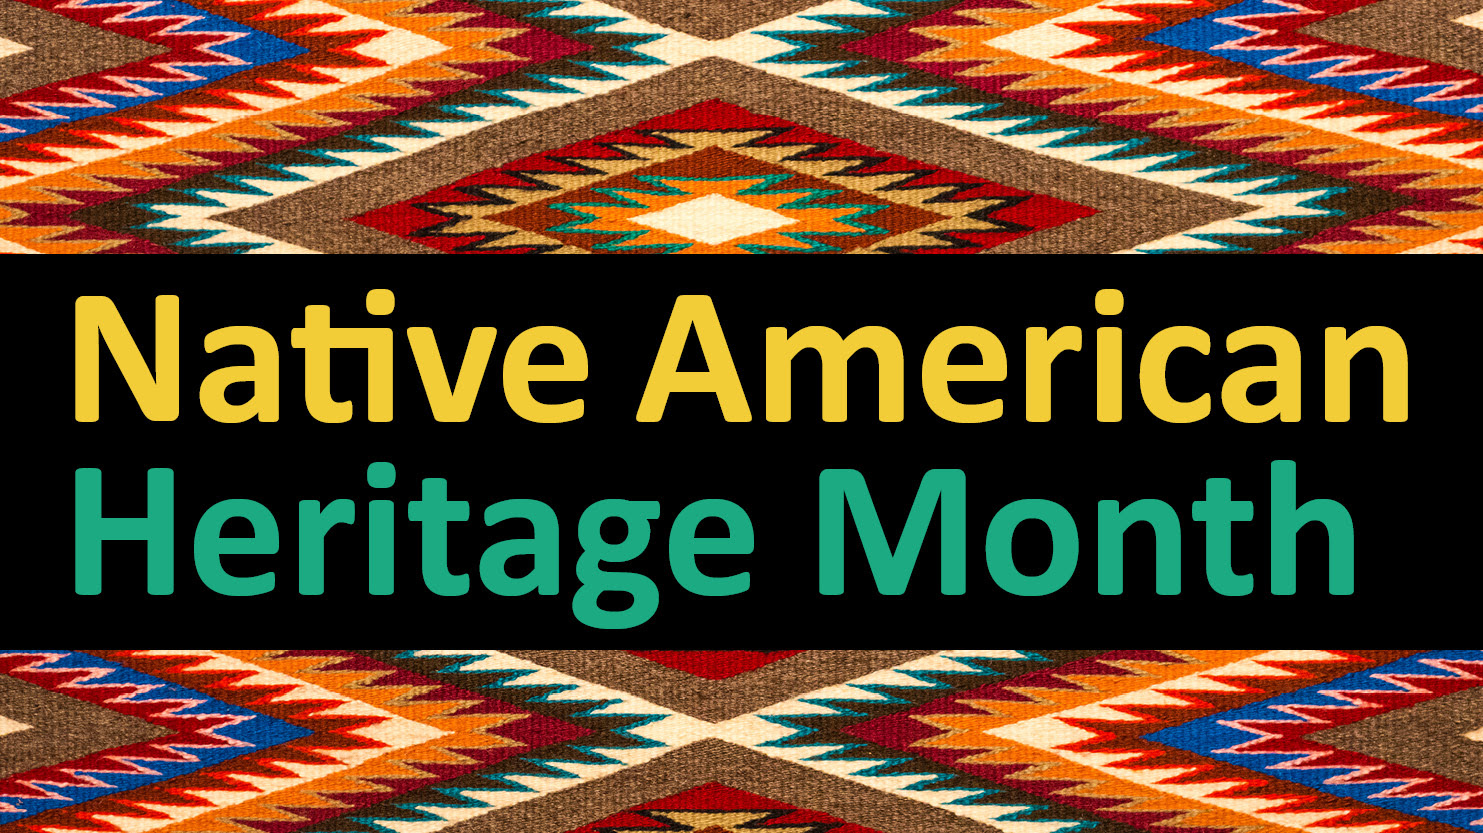 A multicolored woven pattern background with yellow and green text that reads Native American Heritage Month 